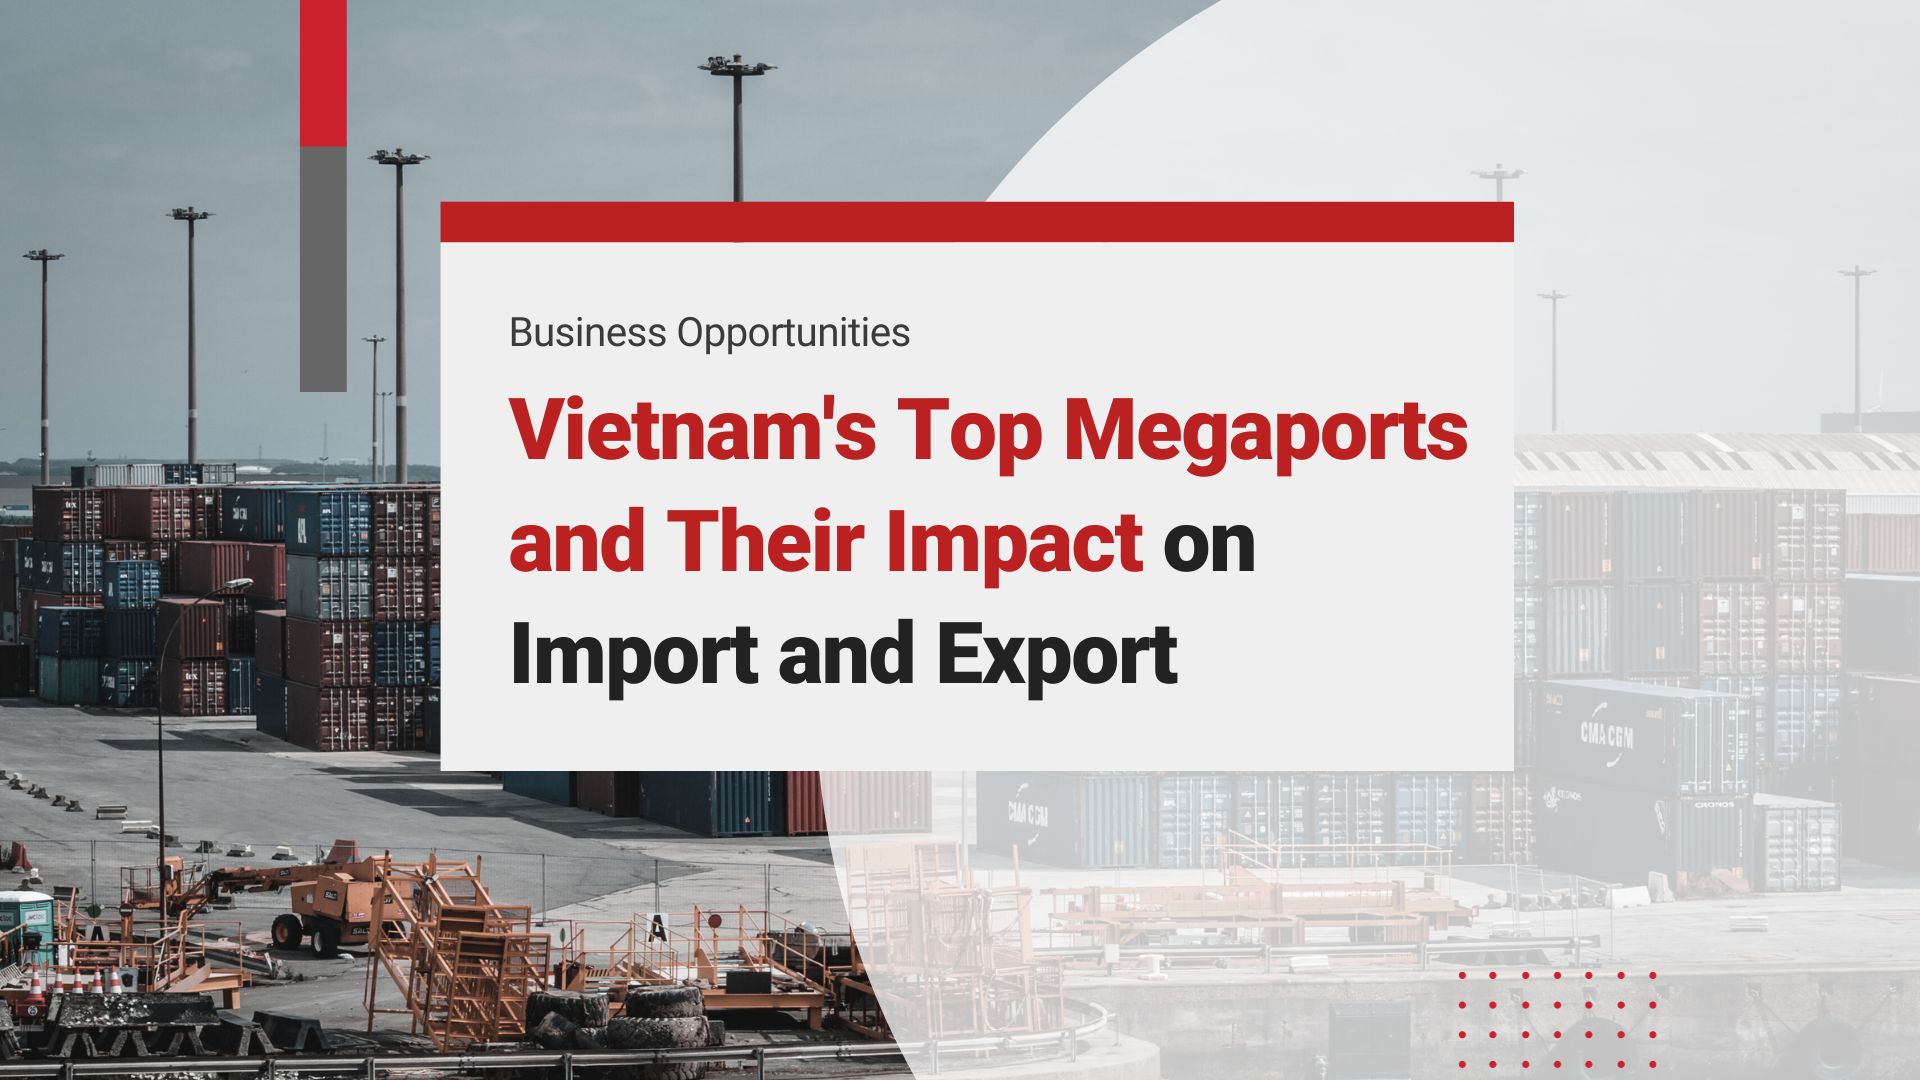 Vietnam's Top Megaports and Their Impact on Logistics